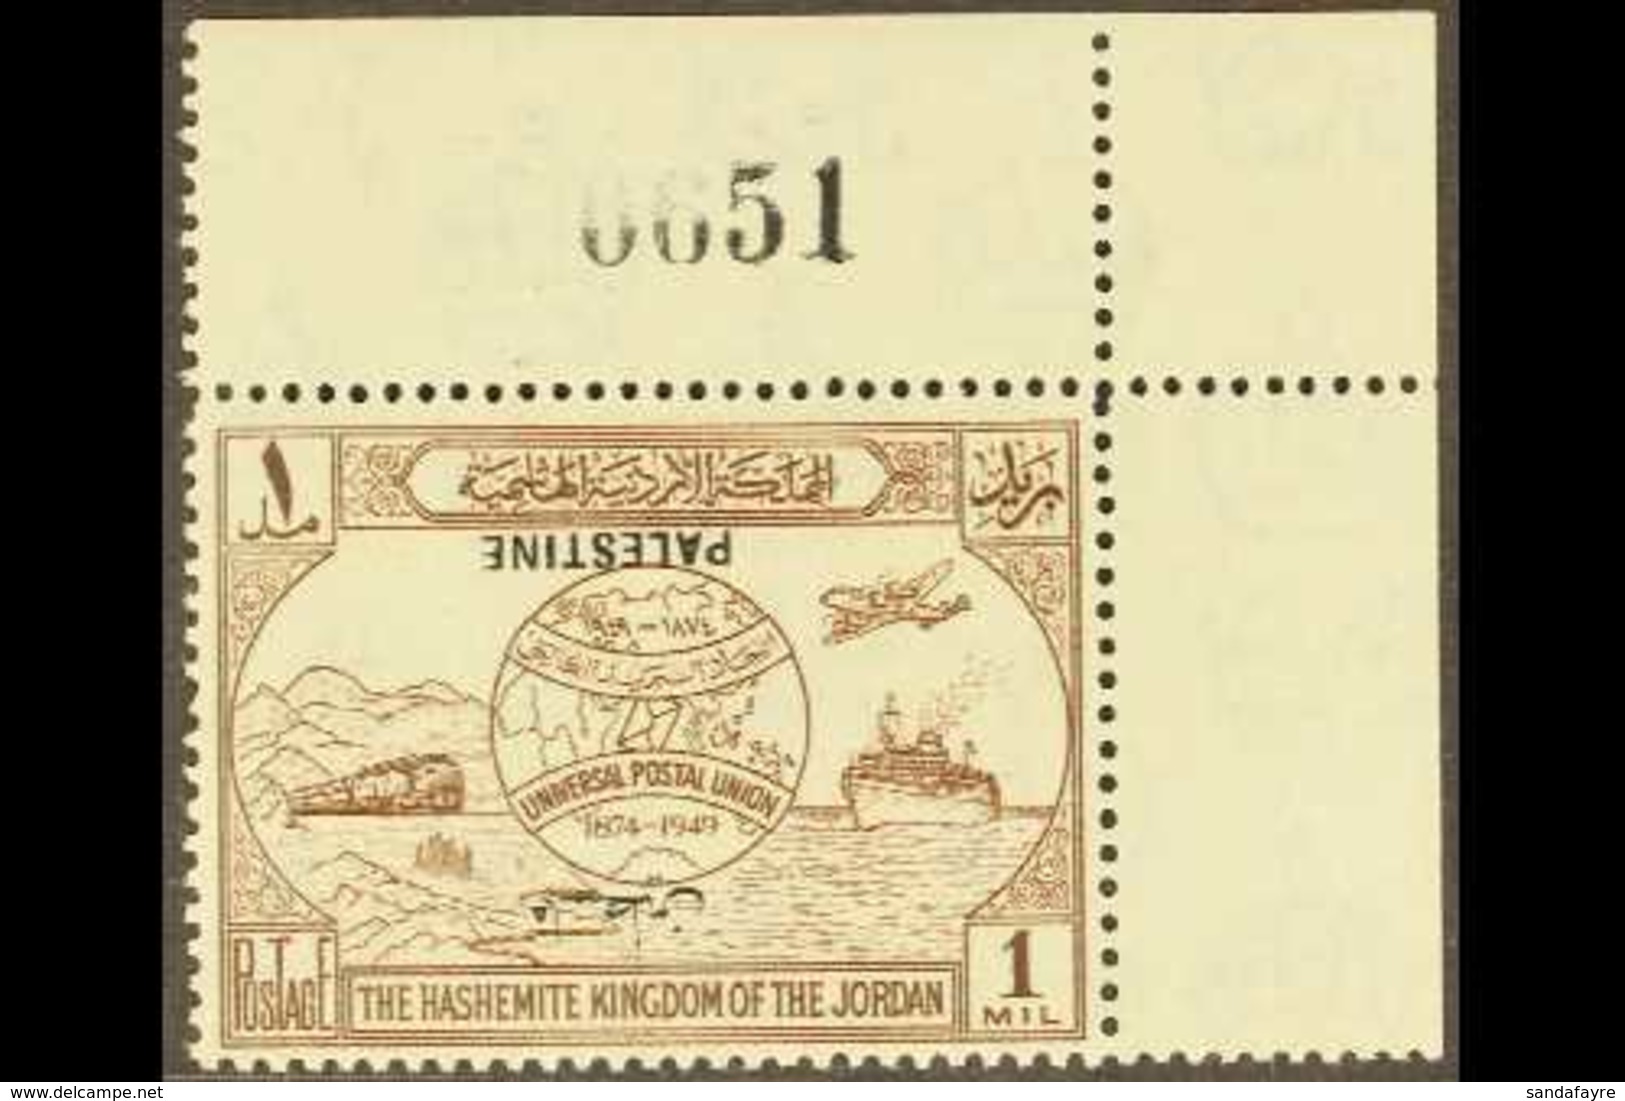 OCCUPATION OF PALESTINE 1949 1m Brown UPU With OVERPRINT INVERTED Variety, SG P30a, Superb Never Hinged Mint Corner Marg - Jordania